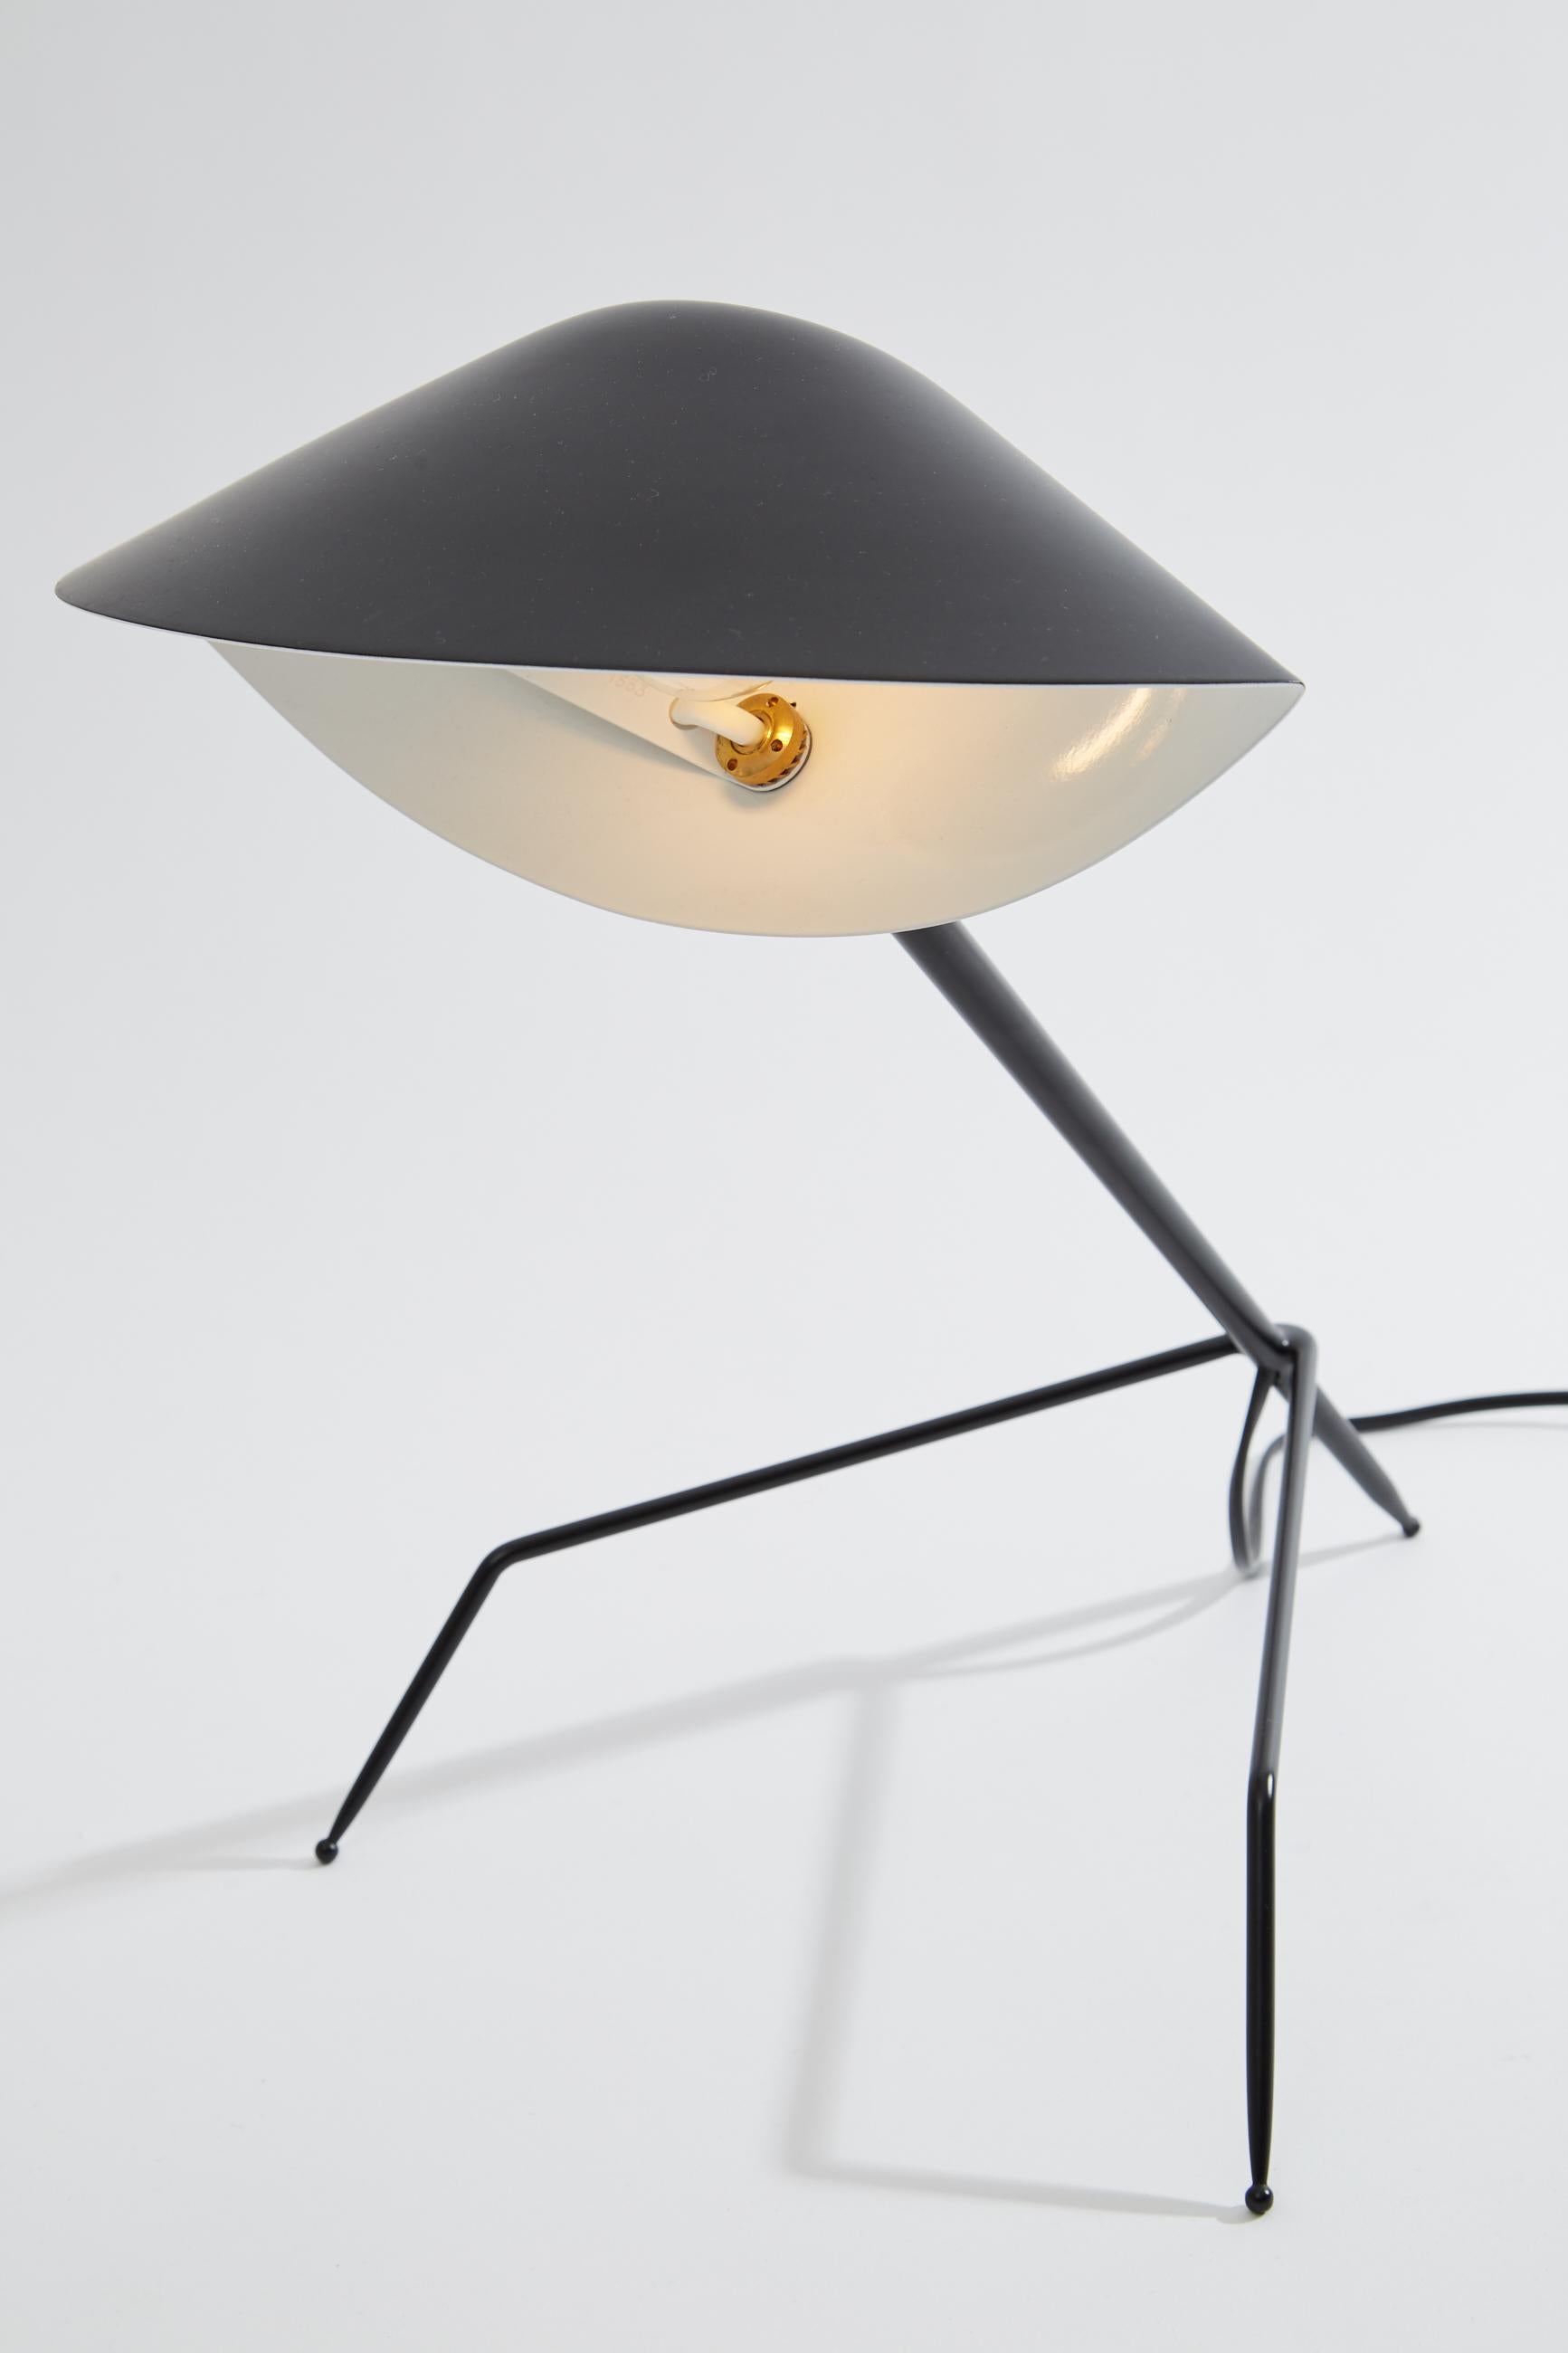 Tripod desk lamp originally designed by Serge Mouille in 1954. This desk lamp is a licensed re-edition from the “Black Shapes” series currently manufactured by Editions Serge Mouille in France. The steel base has three legs and an aluminium